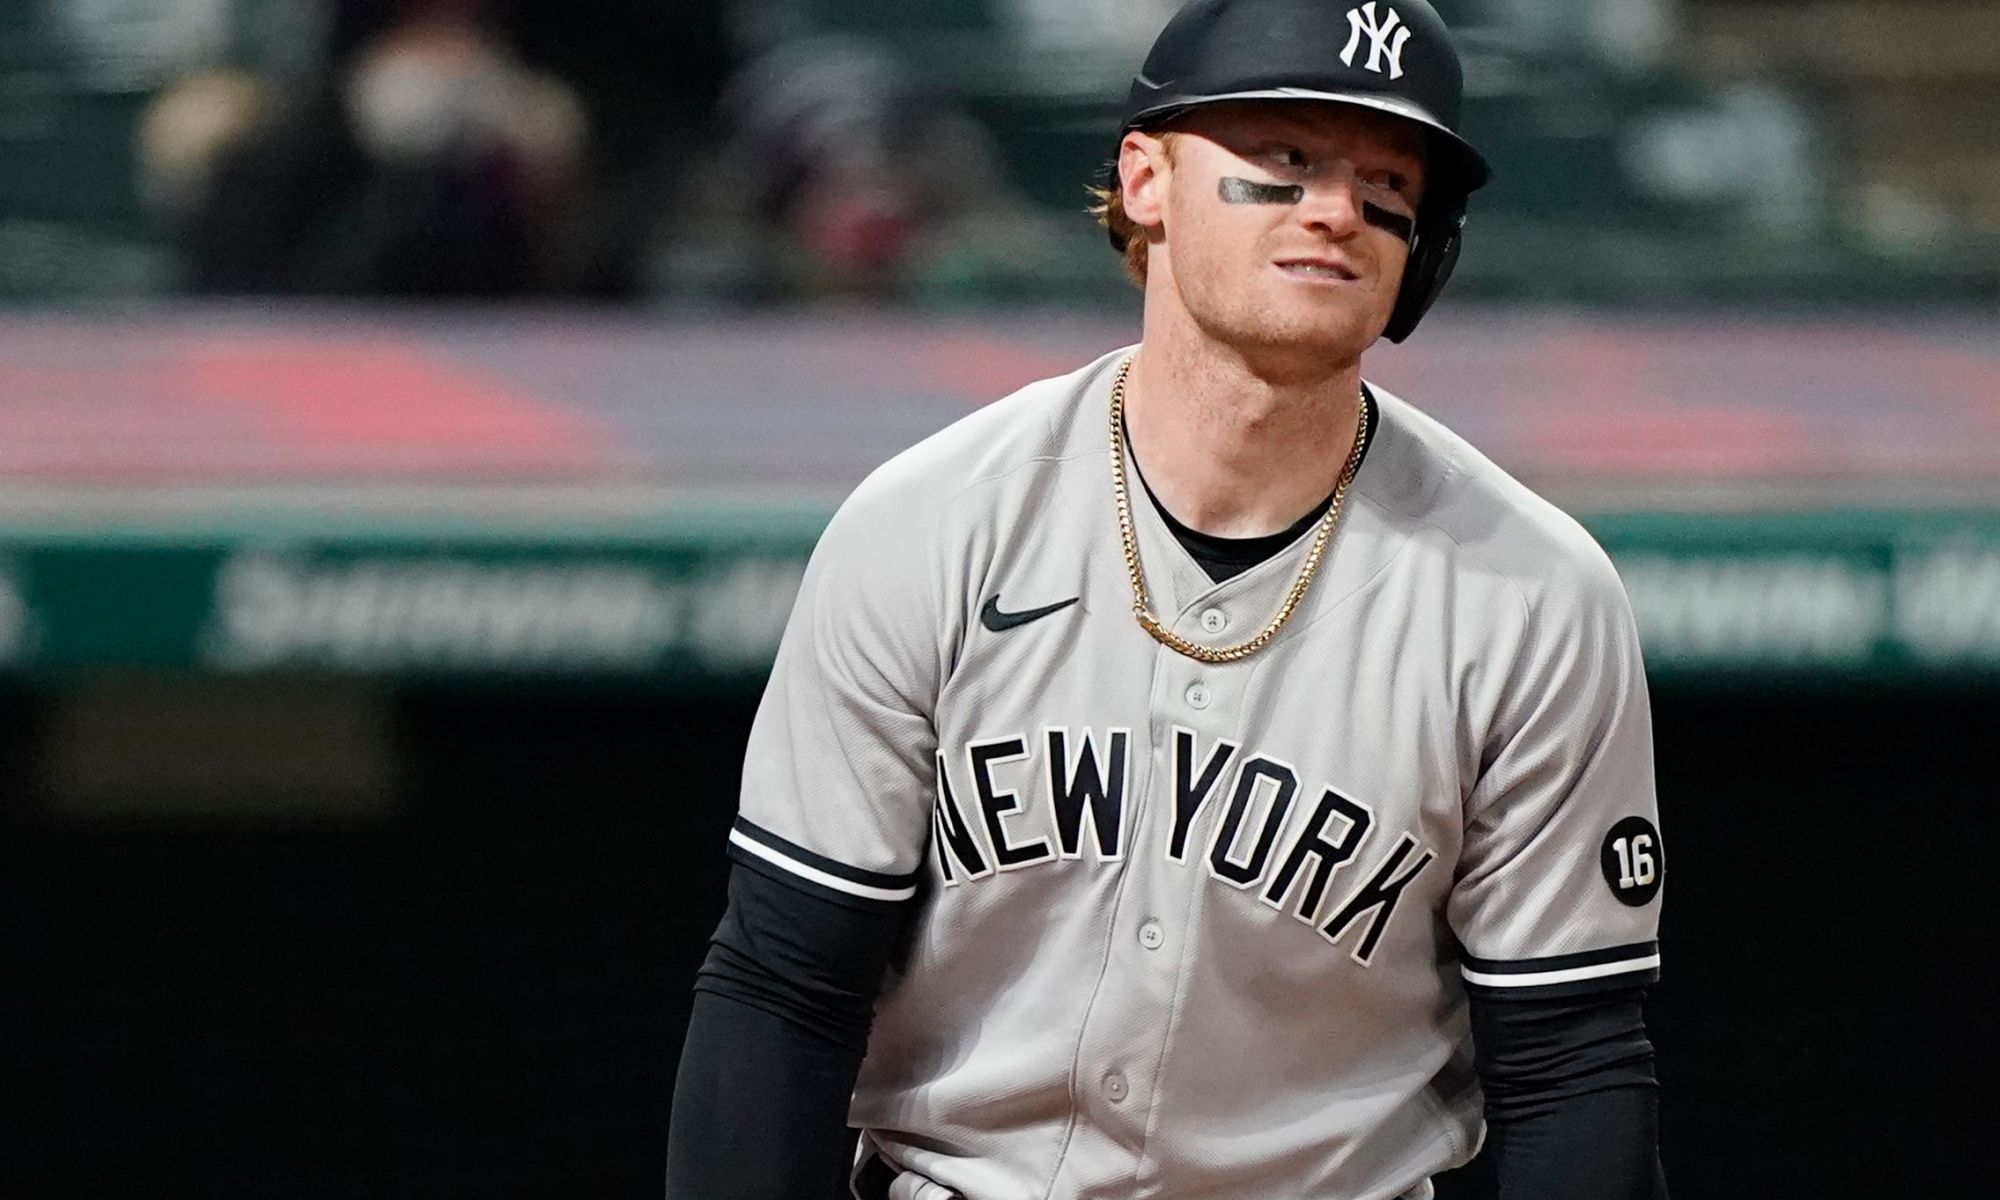 The Yankees released Clint Frazier on Tuesday, making him a free agent